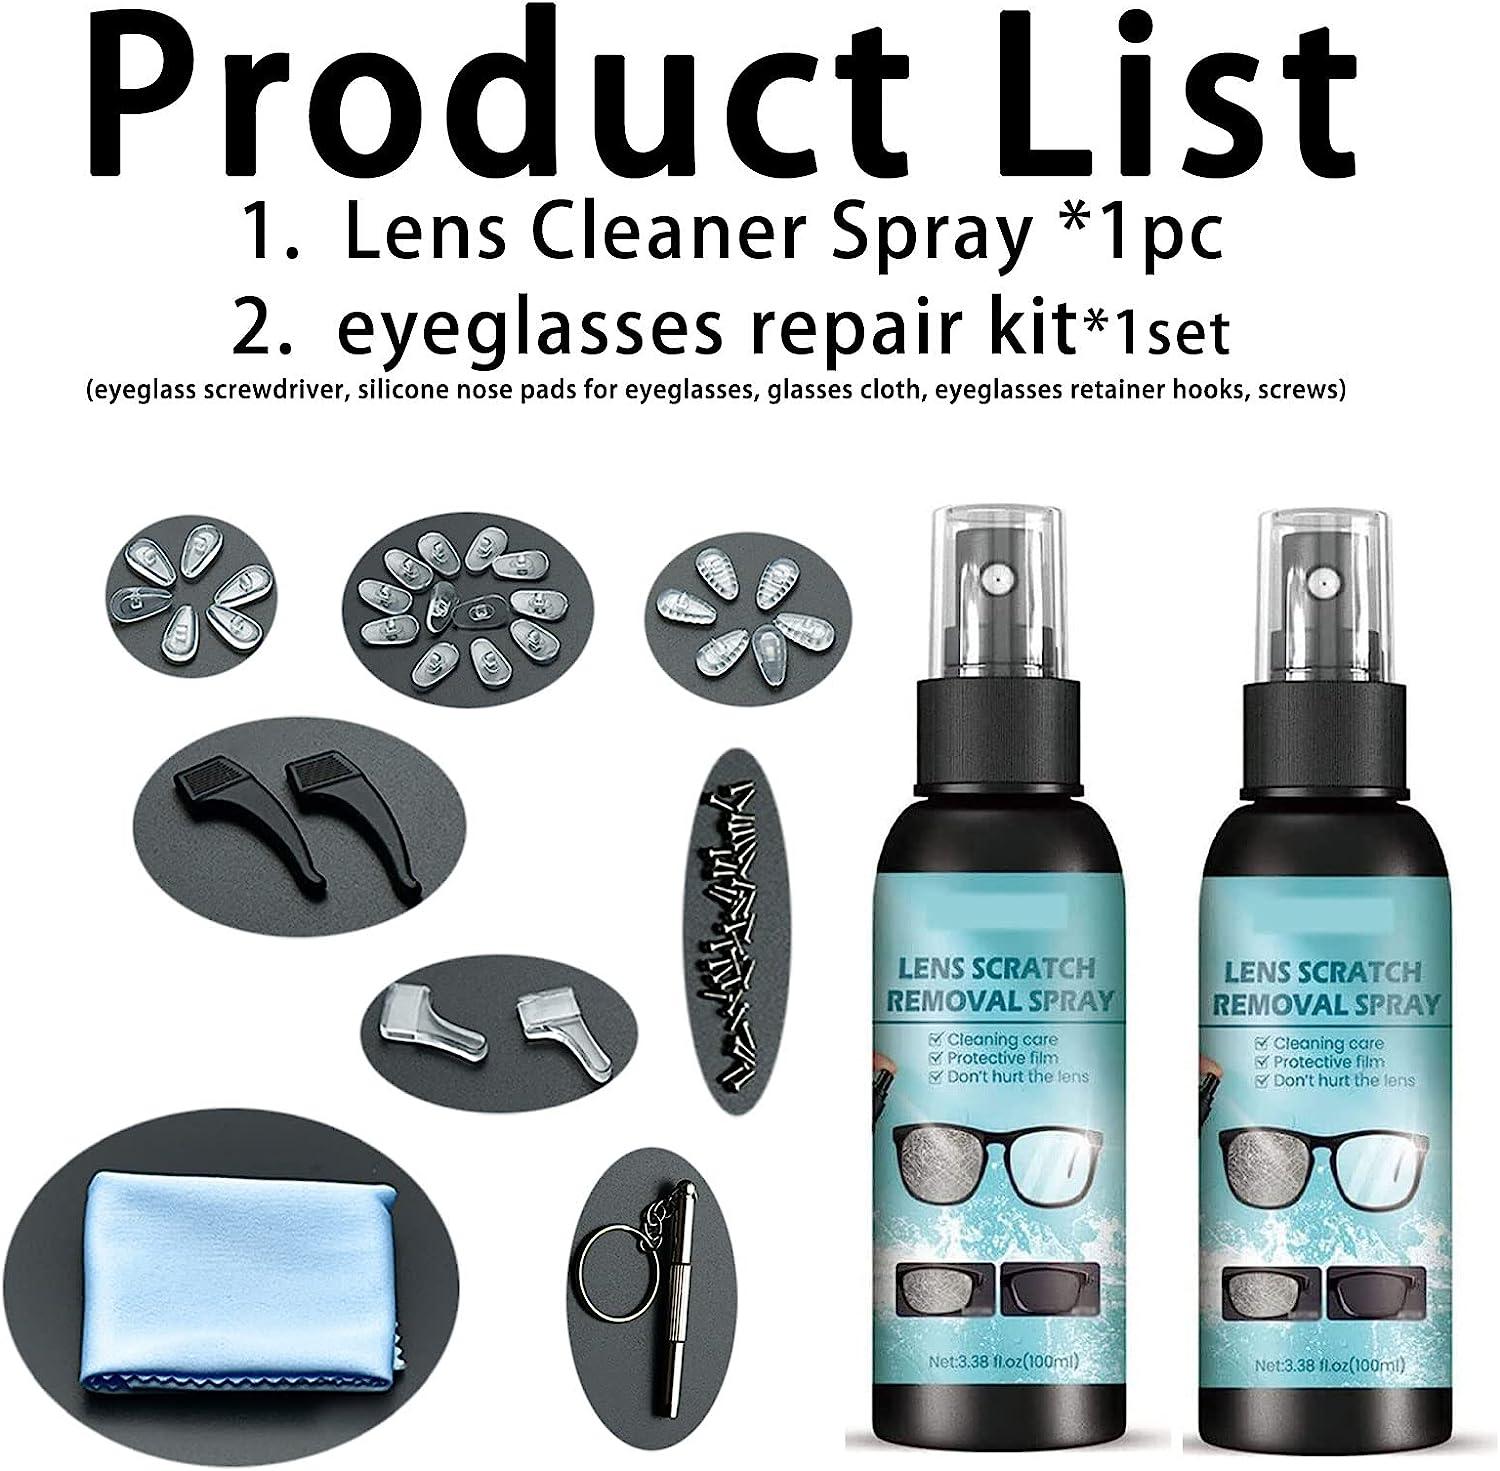  Lens Scratch Removal Spray, Eyeglass Windshield Glass Repair  Liquid, Eyeglass Glass Scratch Repair Solution, Lens Scratch Remover,  Glasses Cleaner Spray for Sunglasses Screen Cleaner Tools (1pc) : Health &  Household